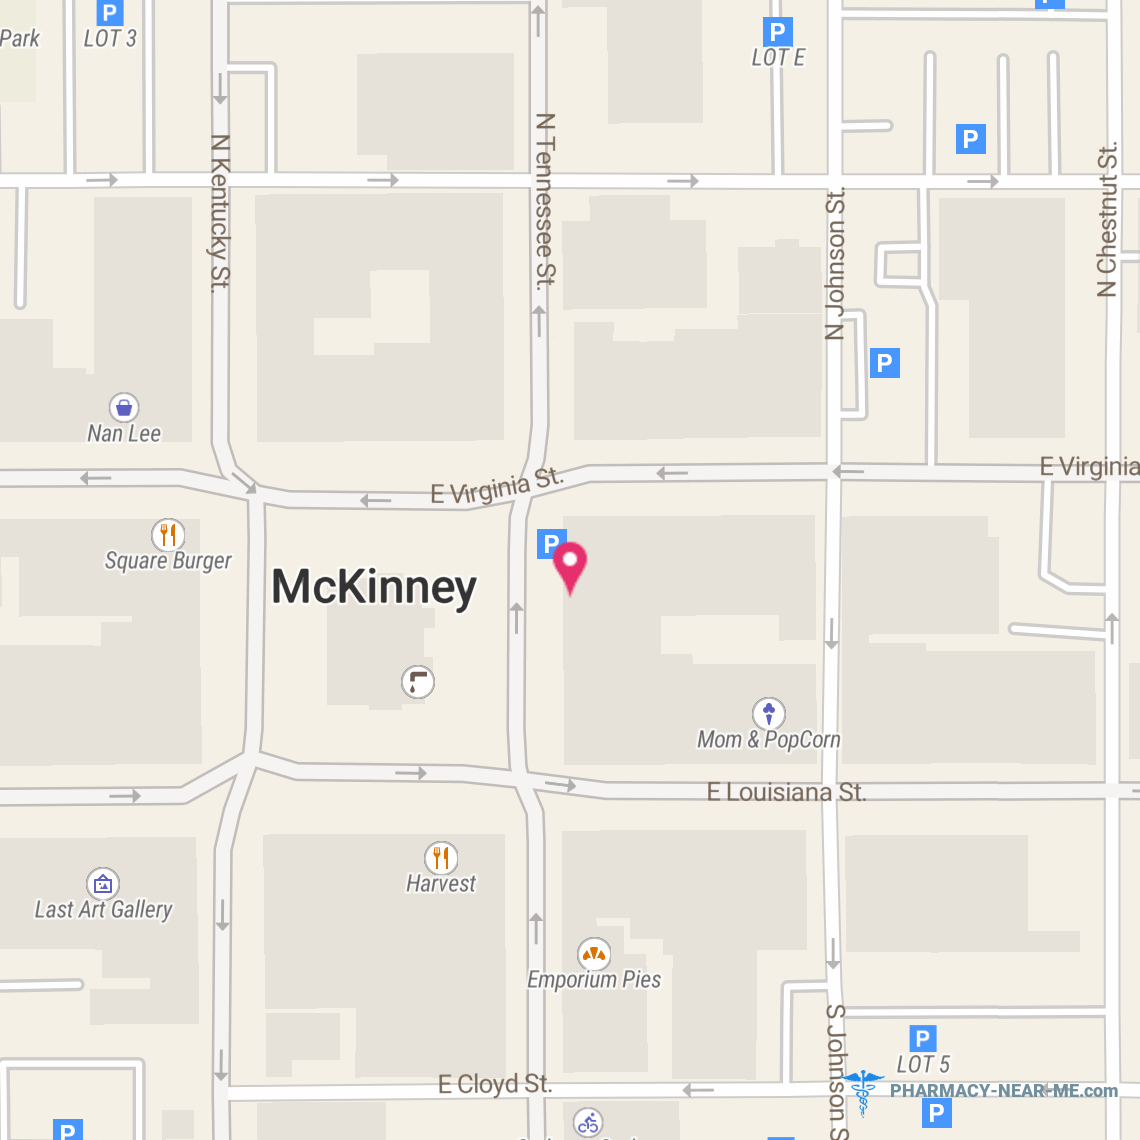 K MOSIER INC - Pharmacy Hours, Phone, Reviews & Information: 114 North Tennessee Street, McKinney, Texas 75069, United States